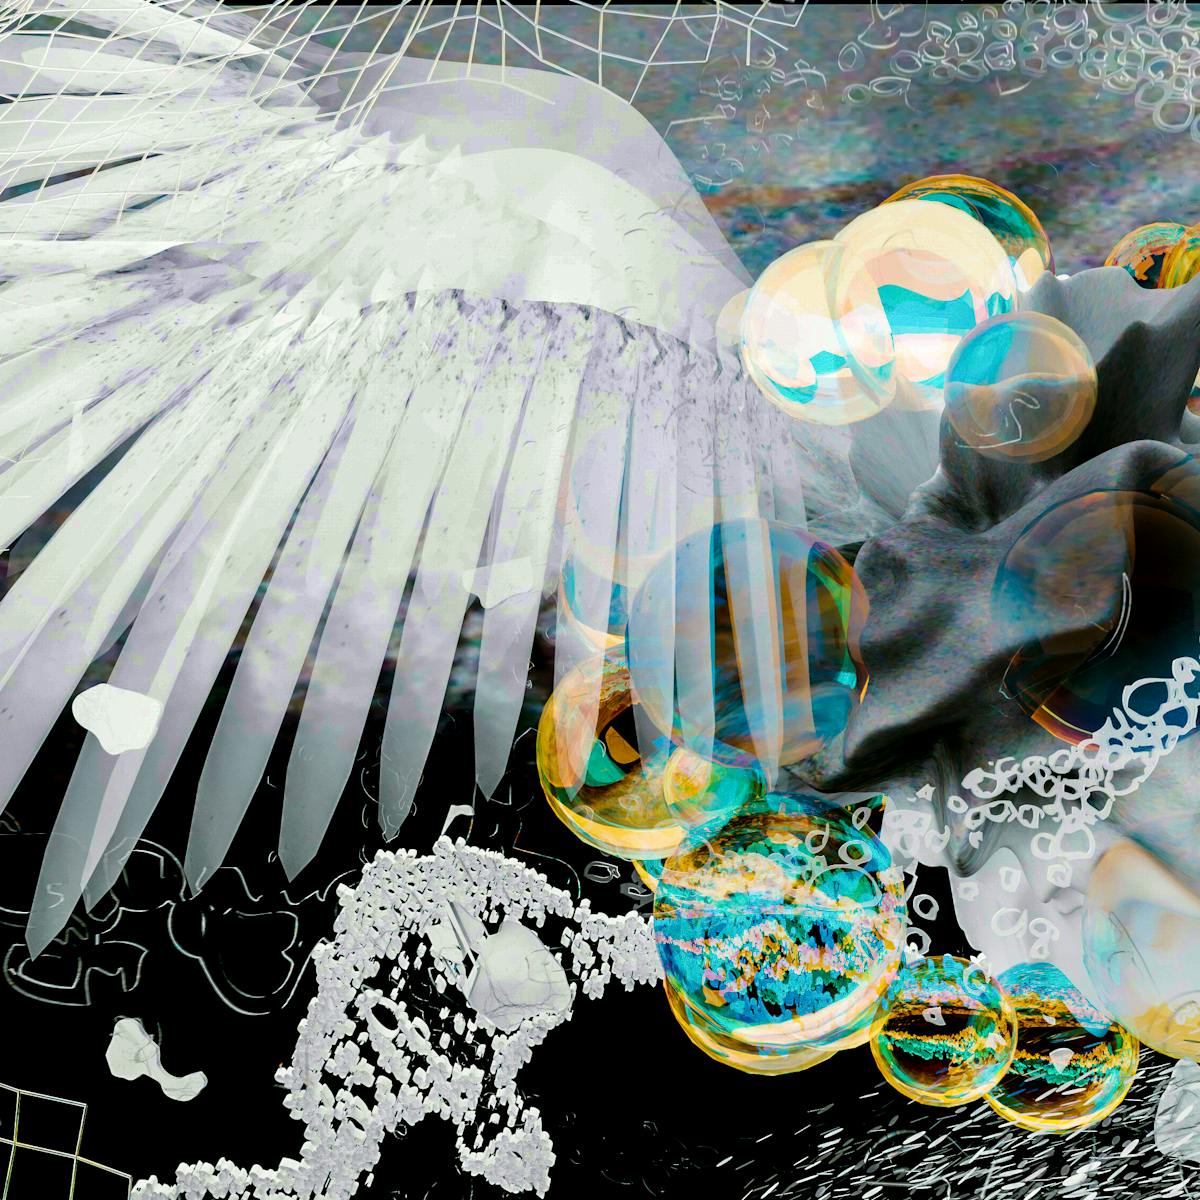 Mixed media artwork depicting a detail from a larger diorama. The scene is rich in details showing a pair of white angel wings on the left, connecting to a ring of bubbles on the right. Overlaying and underlaying these elements are topographical contour lines, and a multitude of other shapes and objects resembling molecules and bubbles. The basis of the artwork is black and white in tone, but it is punctuated by the brightly coloured objects bubbles of yellows, blues and greens.